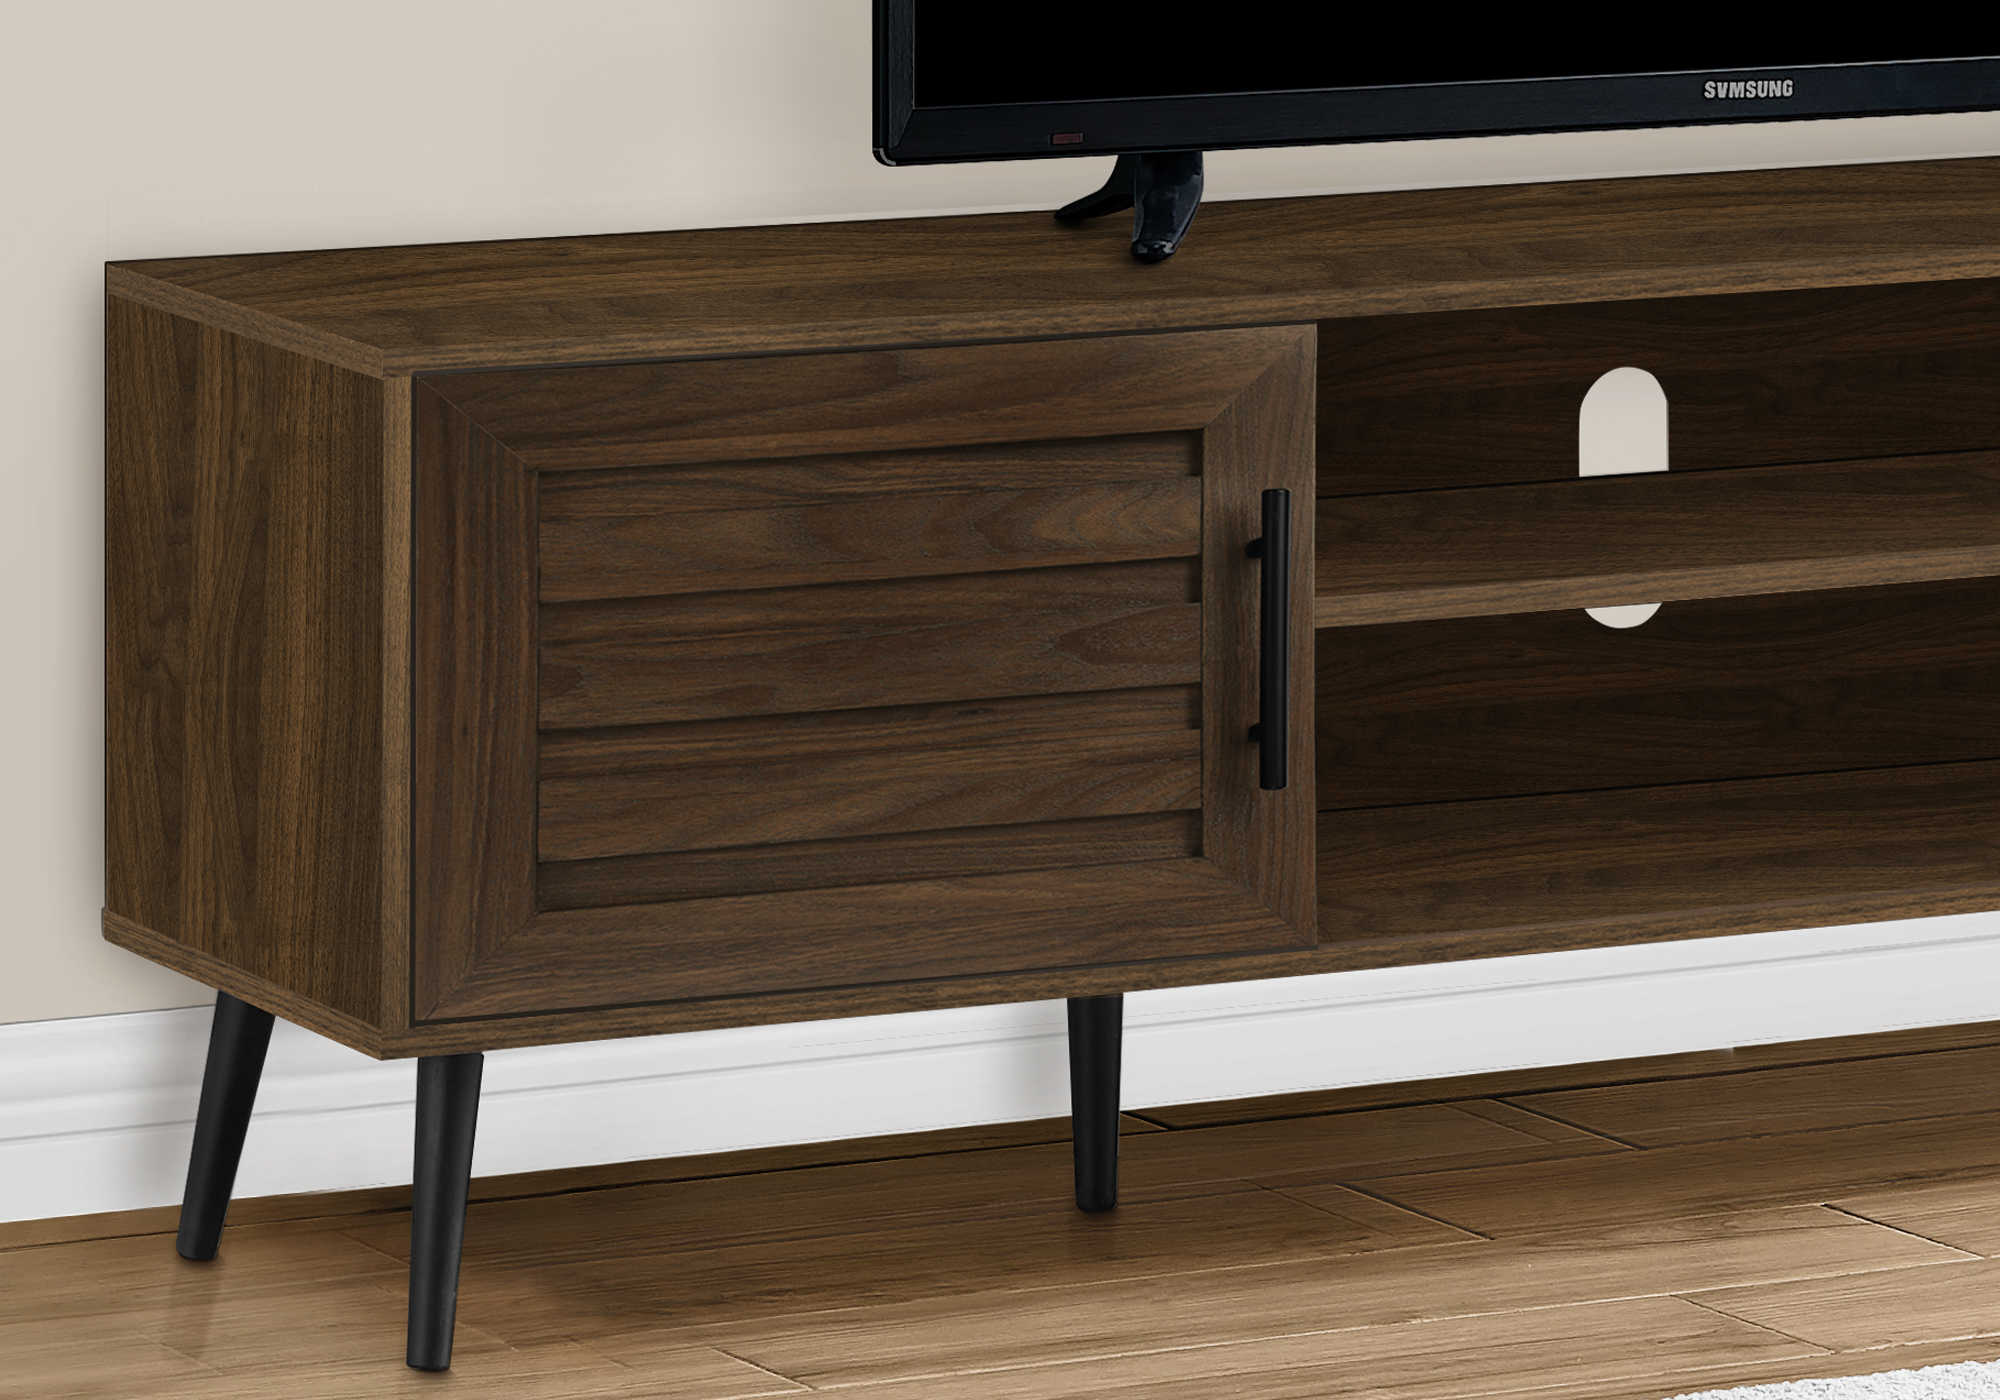 TV STAND - 72"L / BROWN WOOD-LOOK WITH 2 DOORS